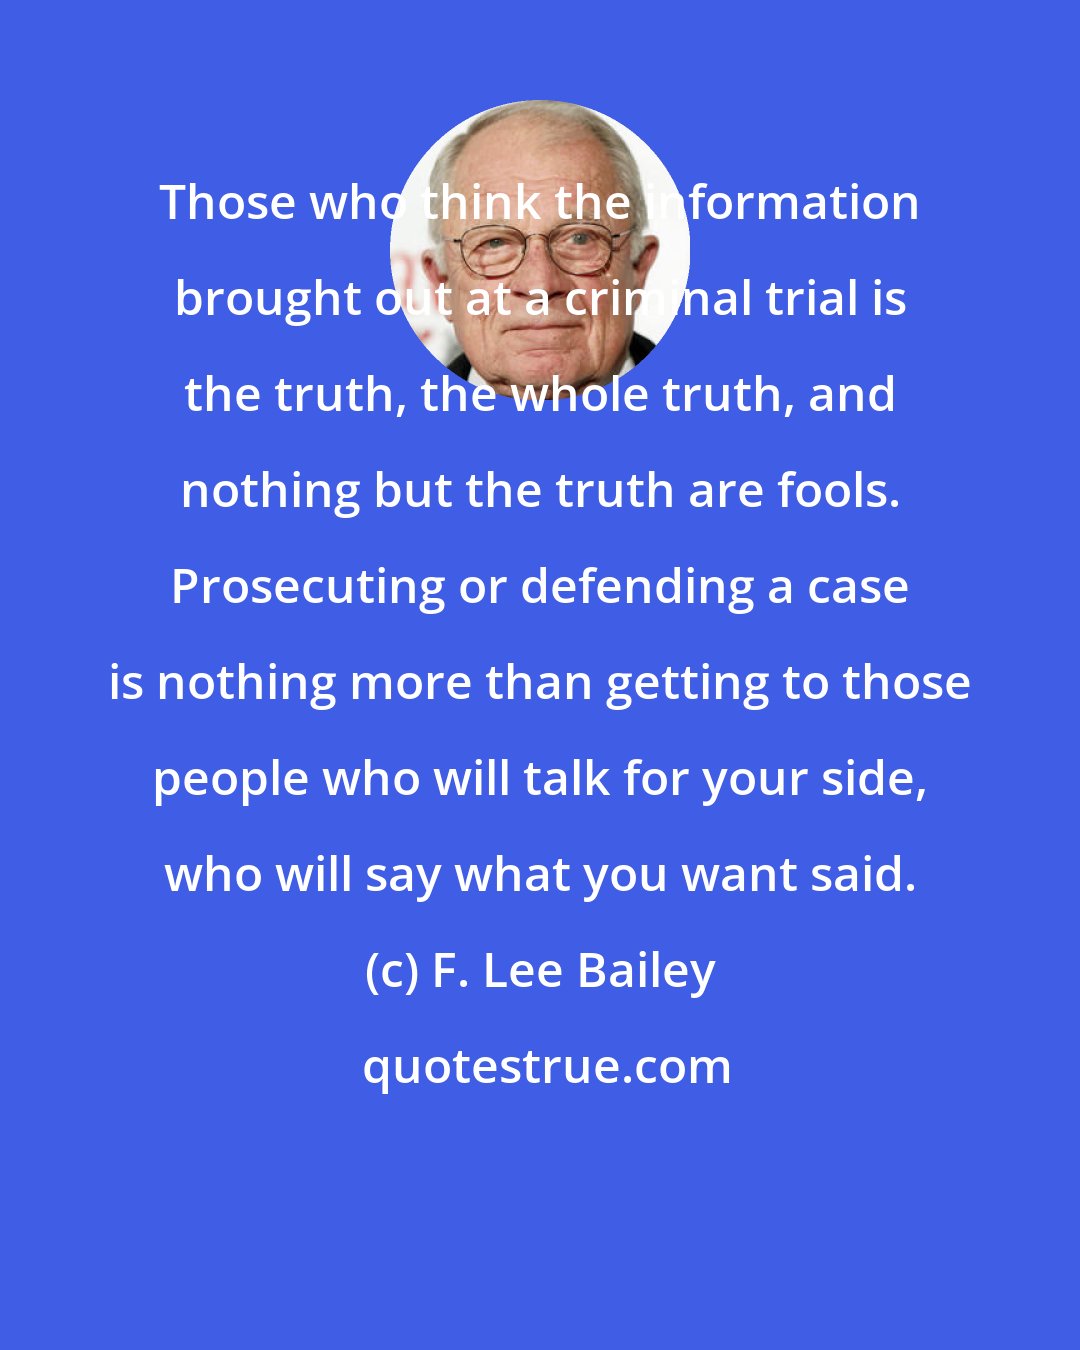 F. Lee Bailey: Those who think the information brought out at a criminal trial is the truth, the whole truth, and nothing but the truth are fools. Prosecuting or defending a case is nothing more than getting to those people who will talk for your side, who will say what you want said.